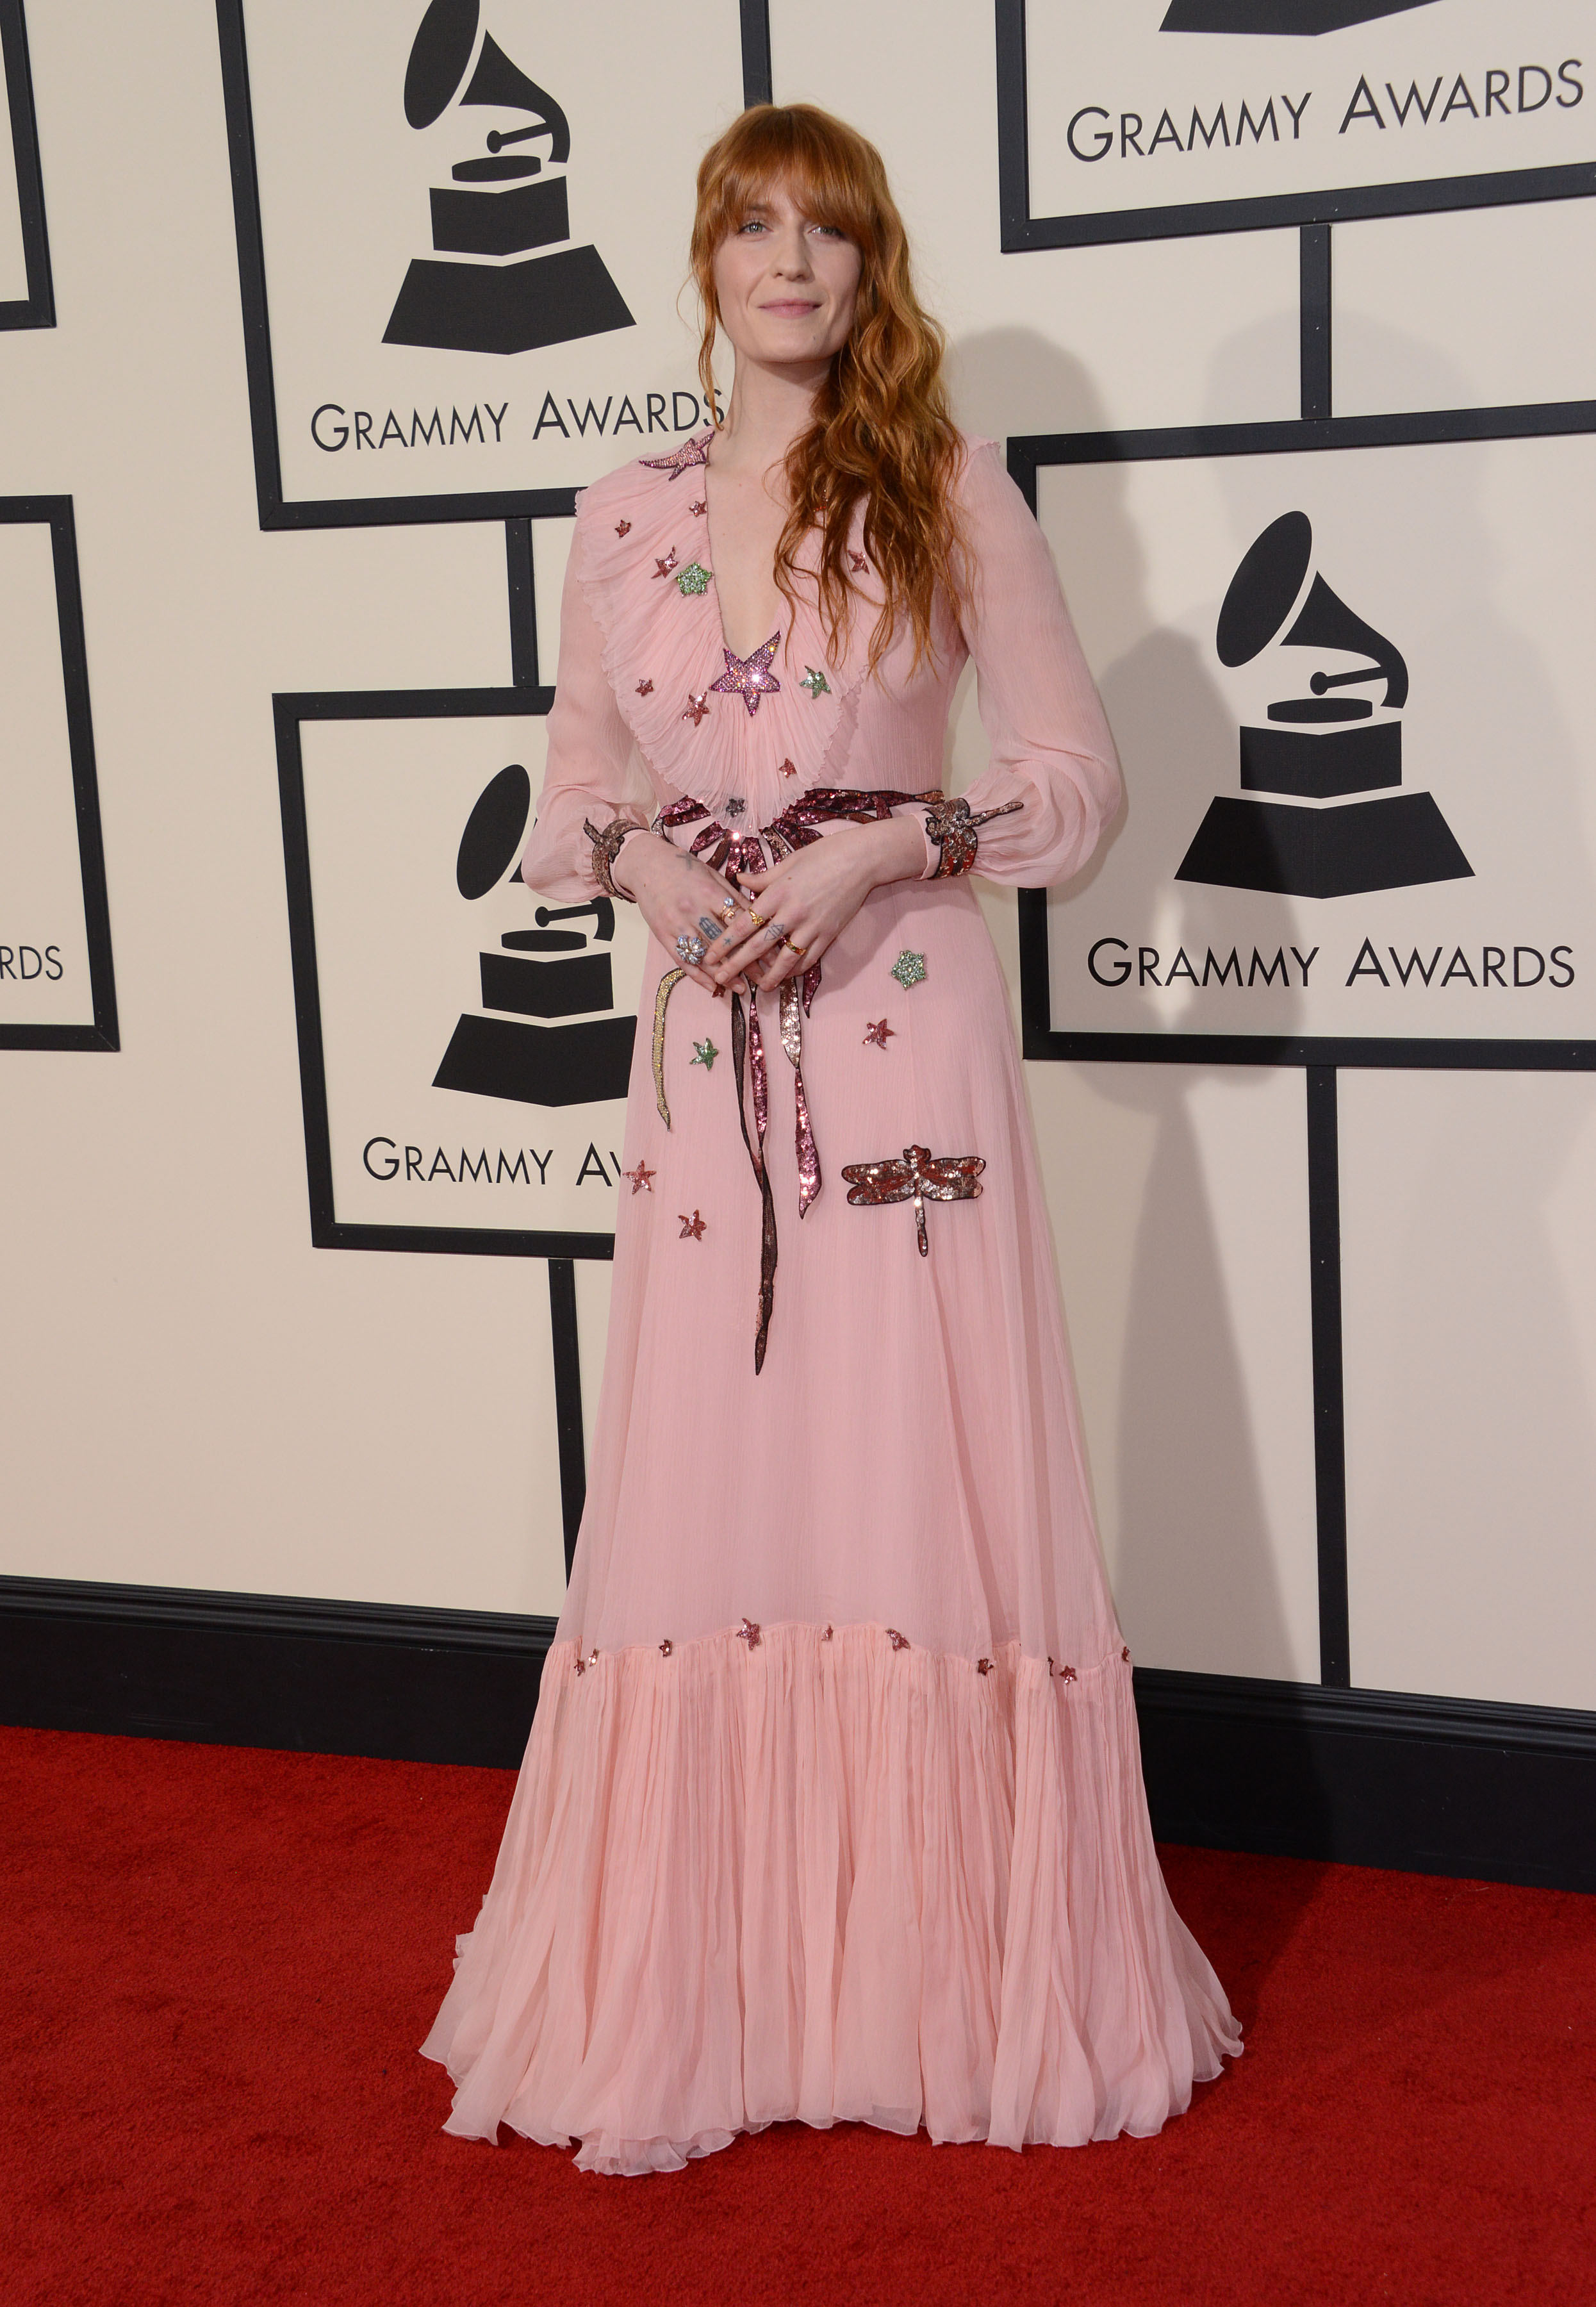 Grammys Weekend Welchly Played: Florence Welch